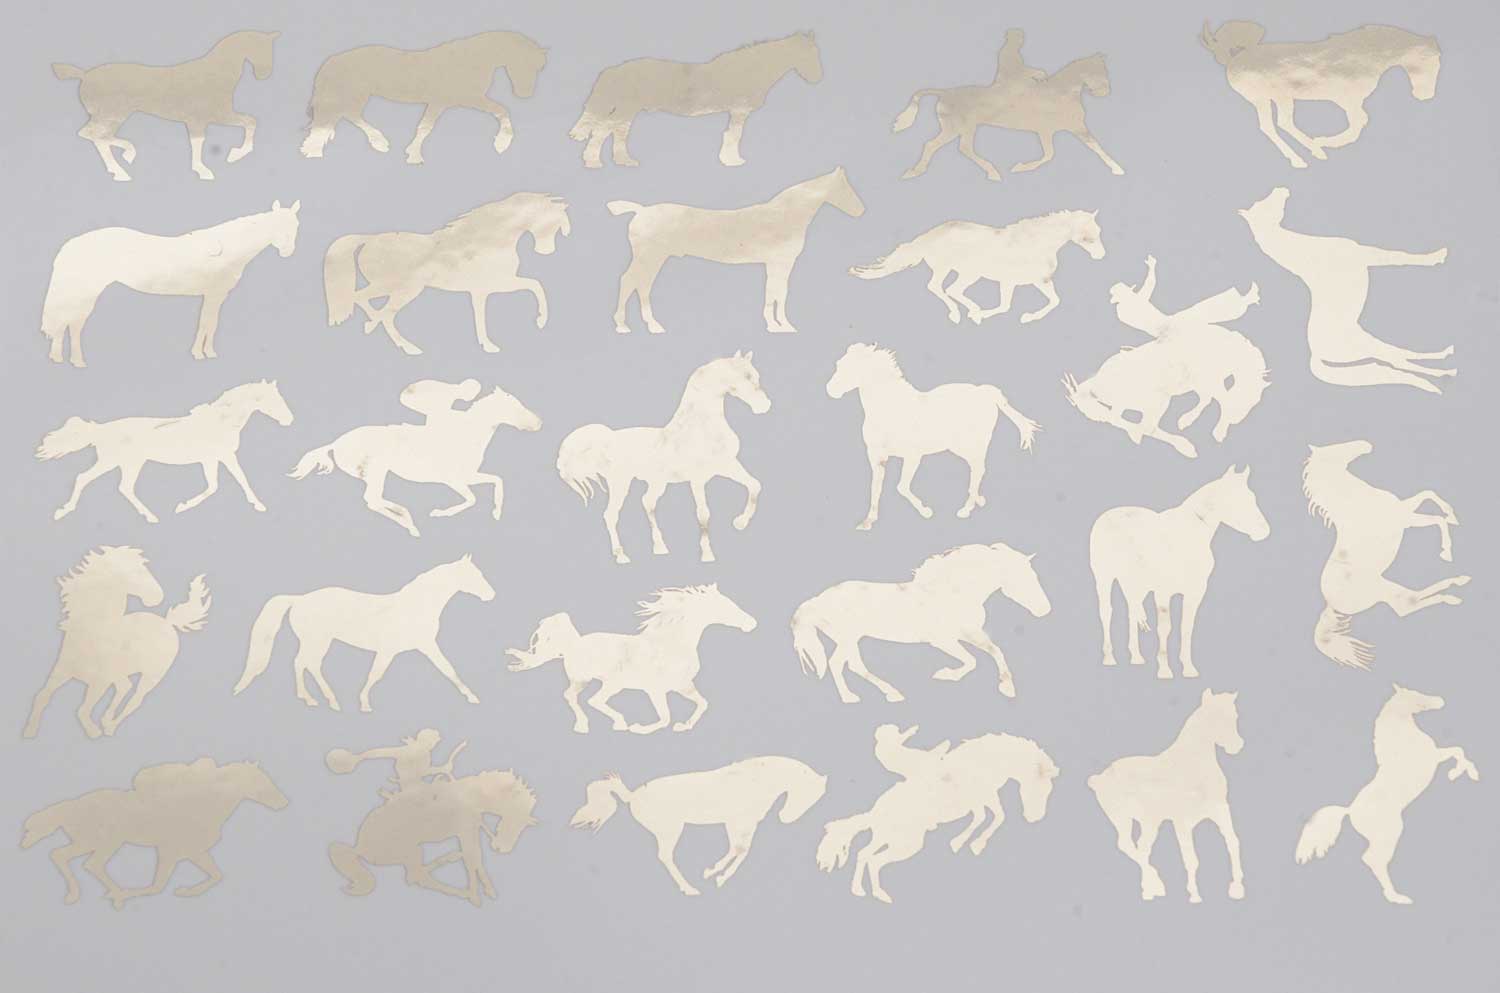 decal 1000mm x 200mm or 1220mm x 350mm HORSES graphic sticker 